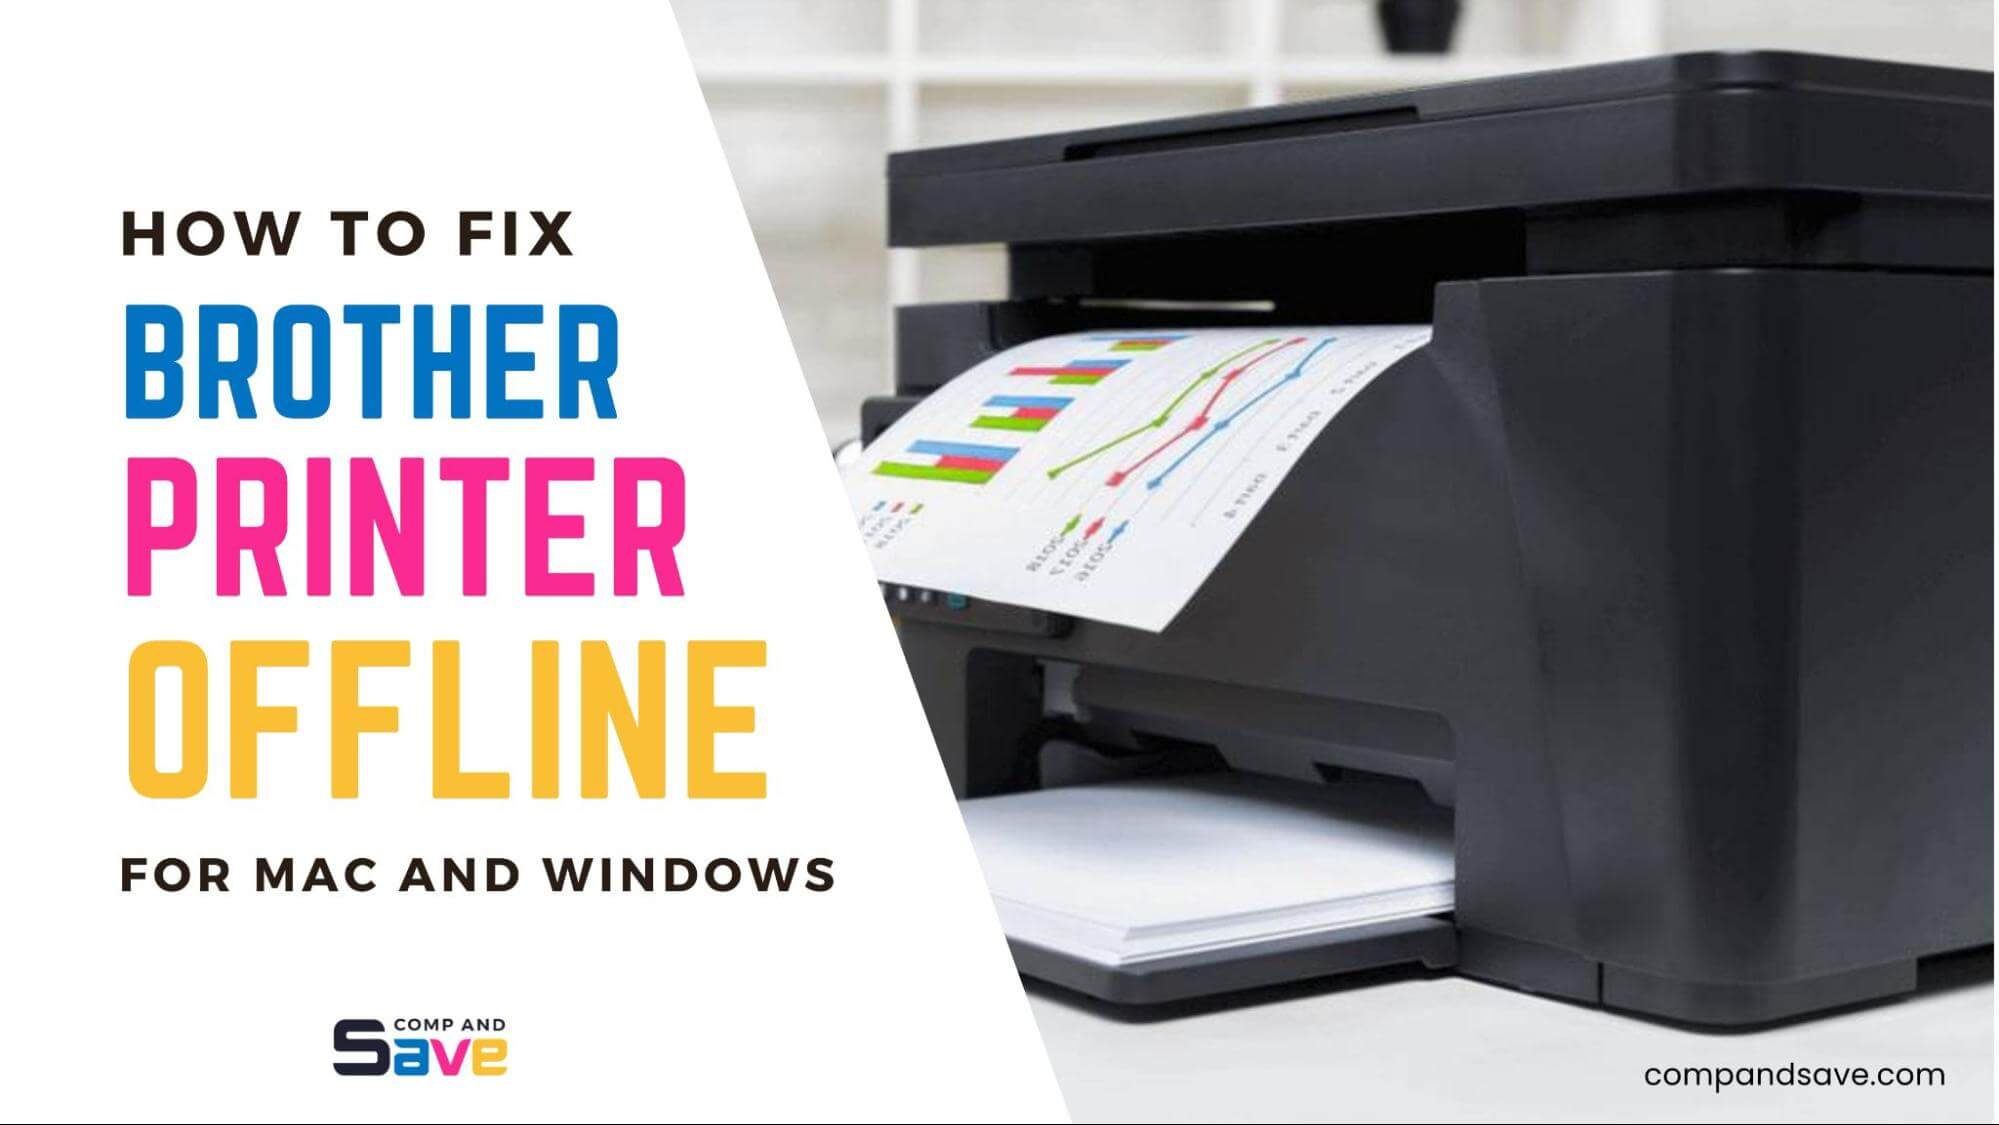 How to Fix Brother Printer Offline for Mac and Windows